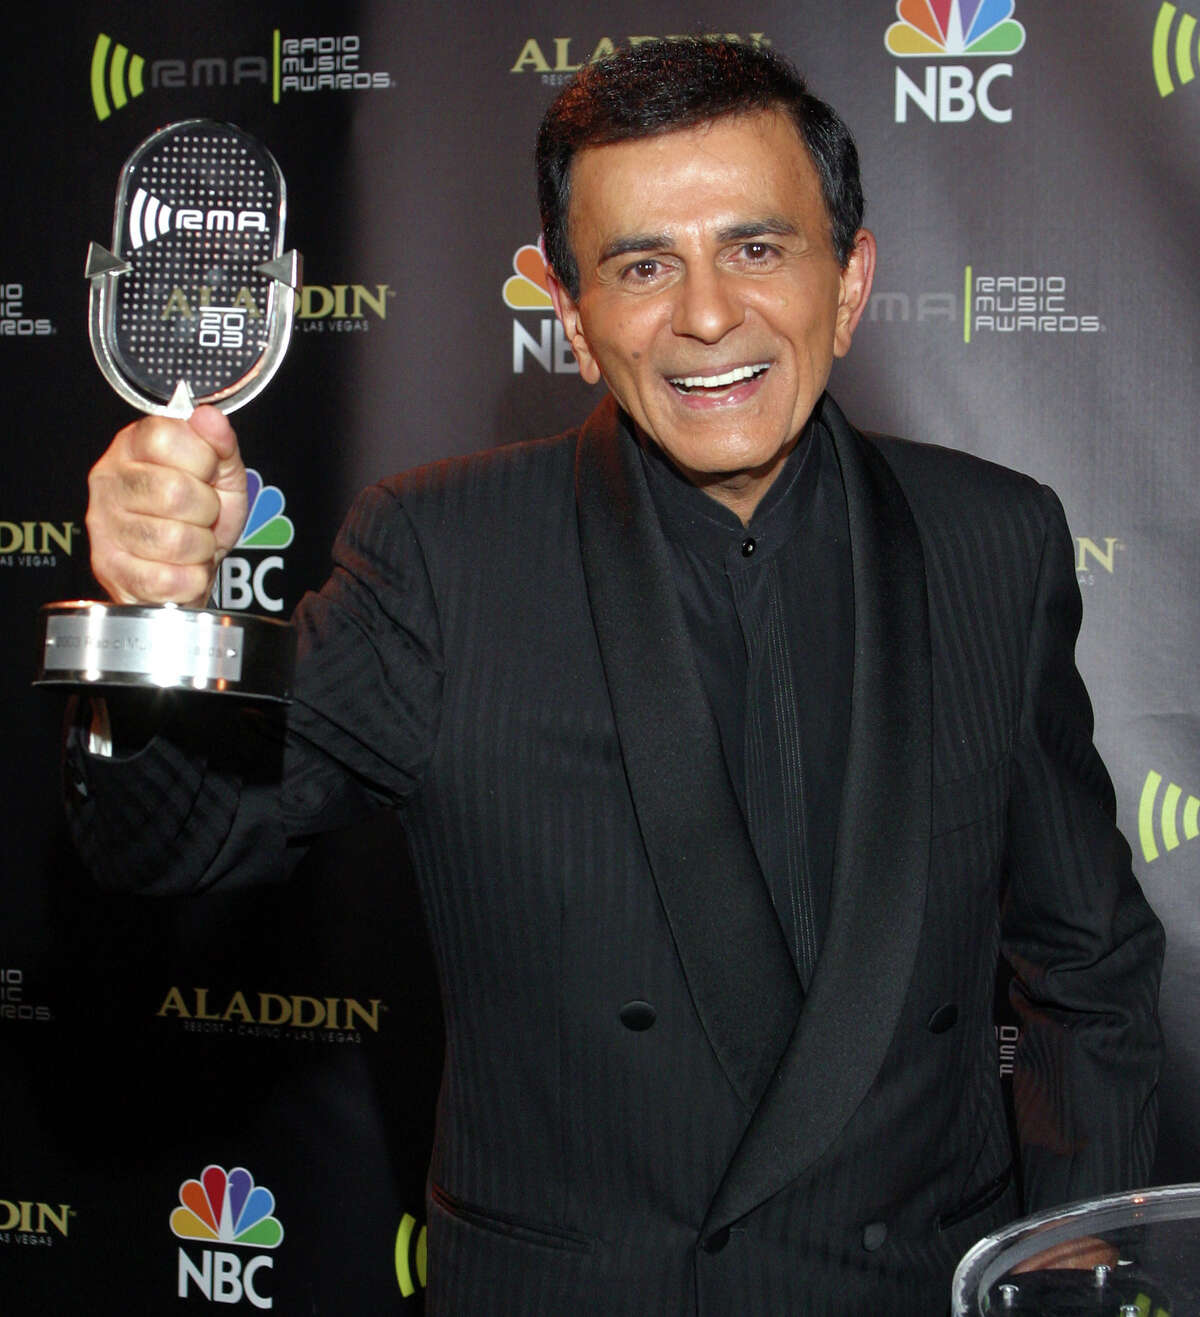 FILE - In this Oct. 27, 2003 file photo, Casey Kasem poses for photographers after receiving the Radio Icon award during The 2003 Radio Music Awards at the Aladdin Resort and Casino in Las Vegas. Kasem, the smooth-voiced radio broadcaster who became the king of the top 40 countdown, died Sunday, June 15, 2014, according to Danny Deraney, publicist for Kasem's daughter, Kerri. He was 82.